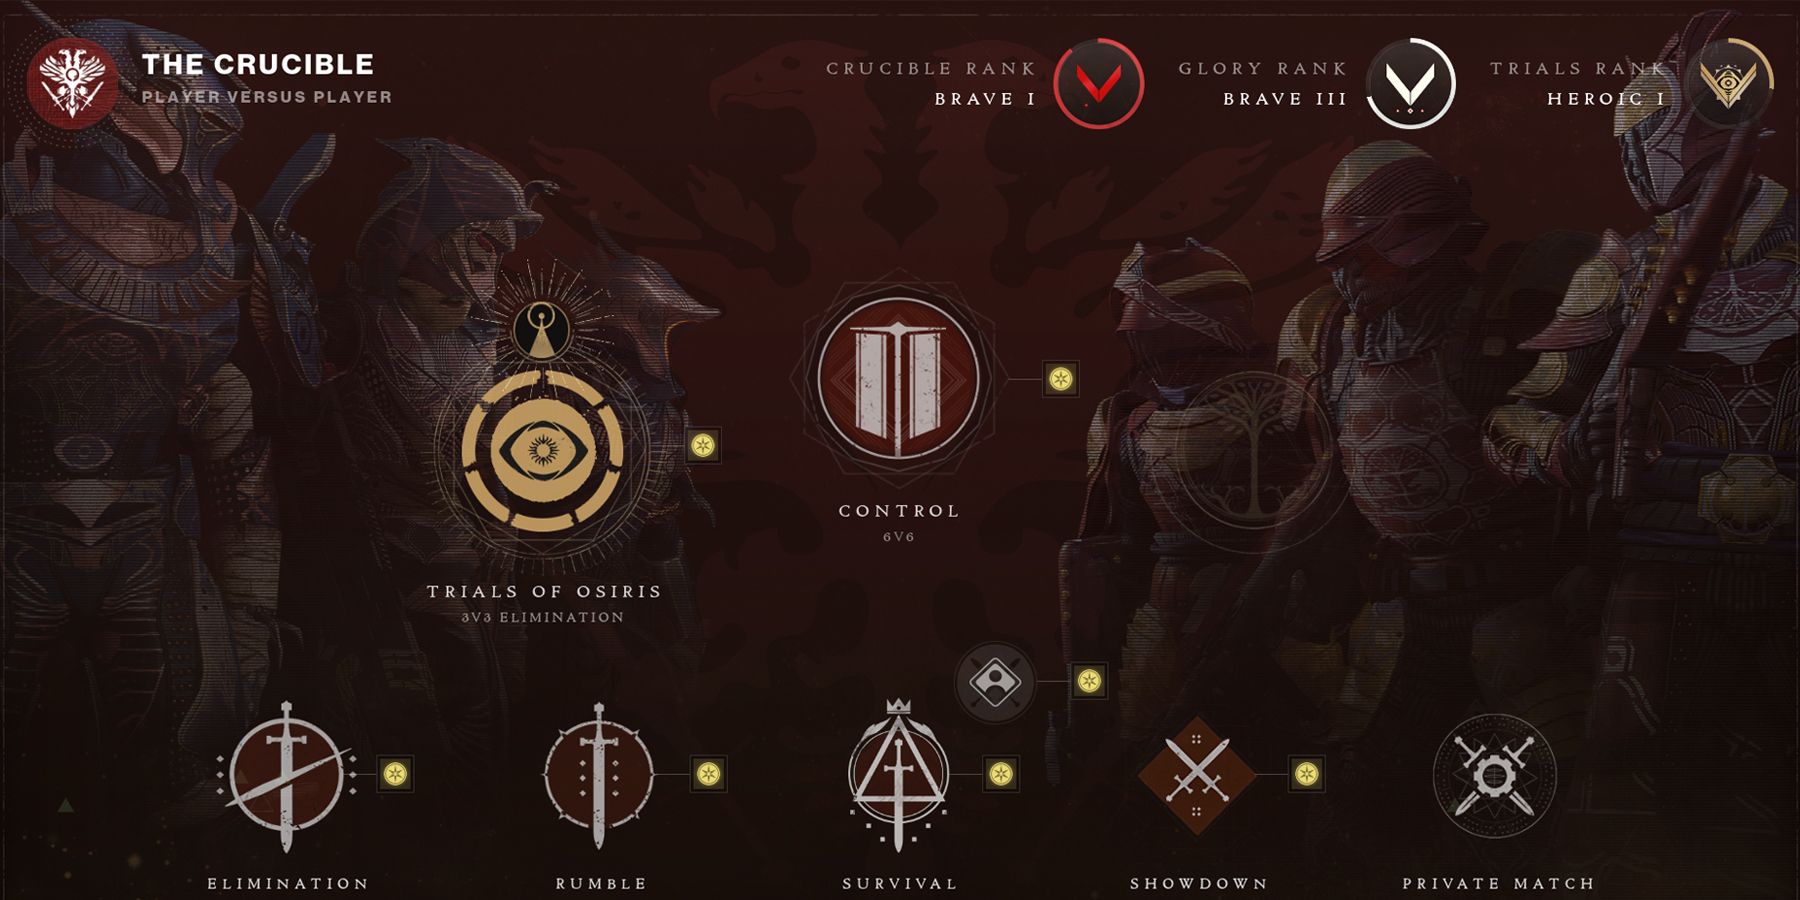 The in-game screen for the Crucible playlist in Destiny 2.